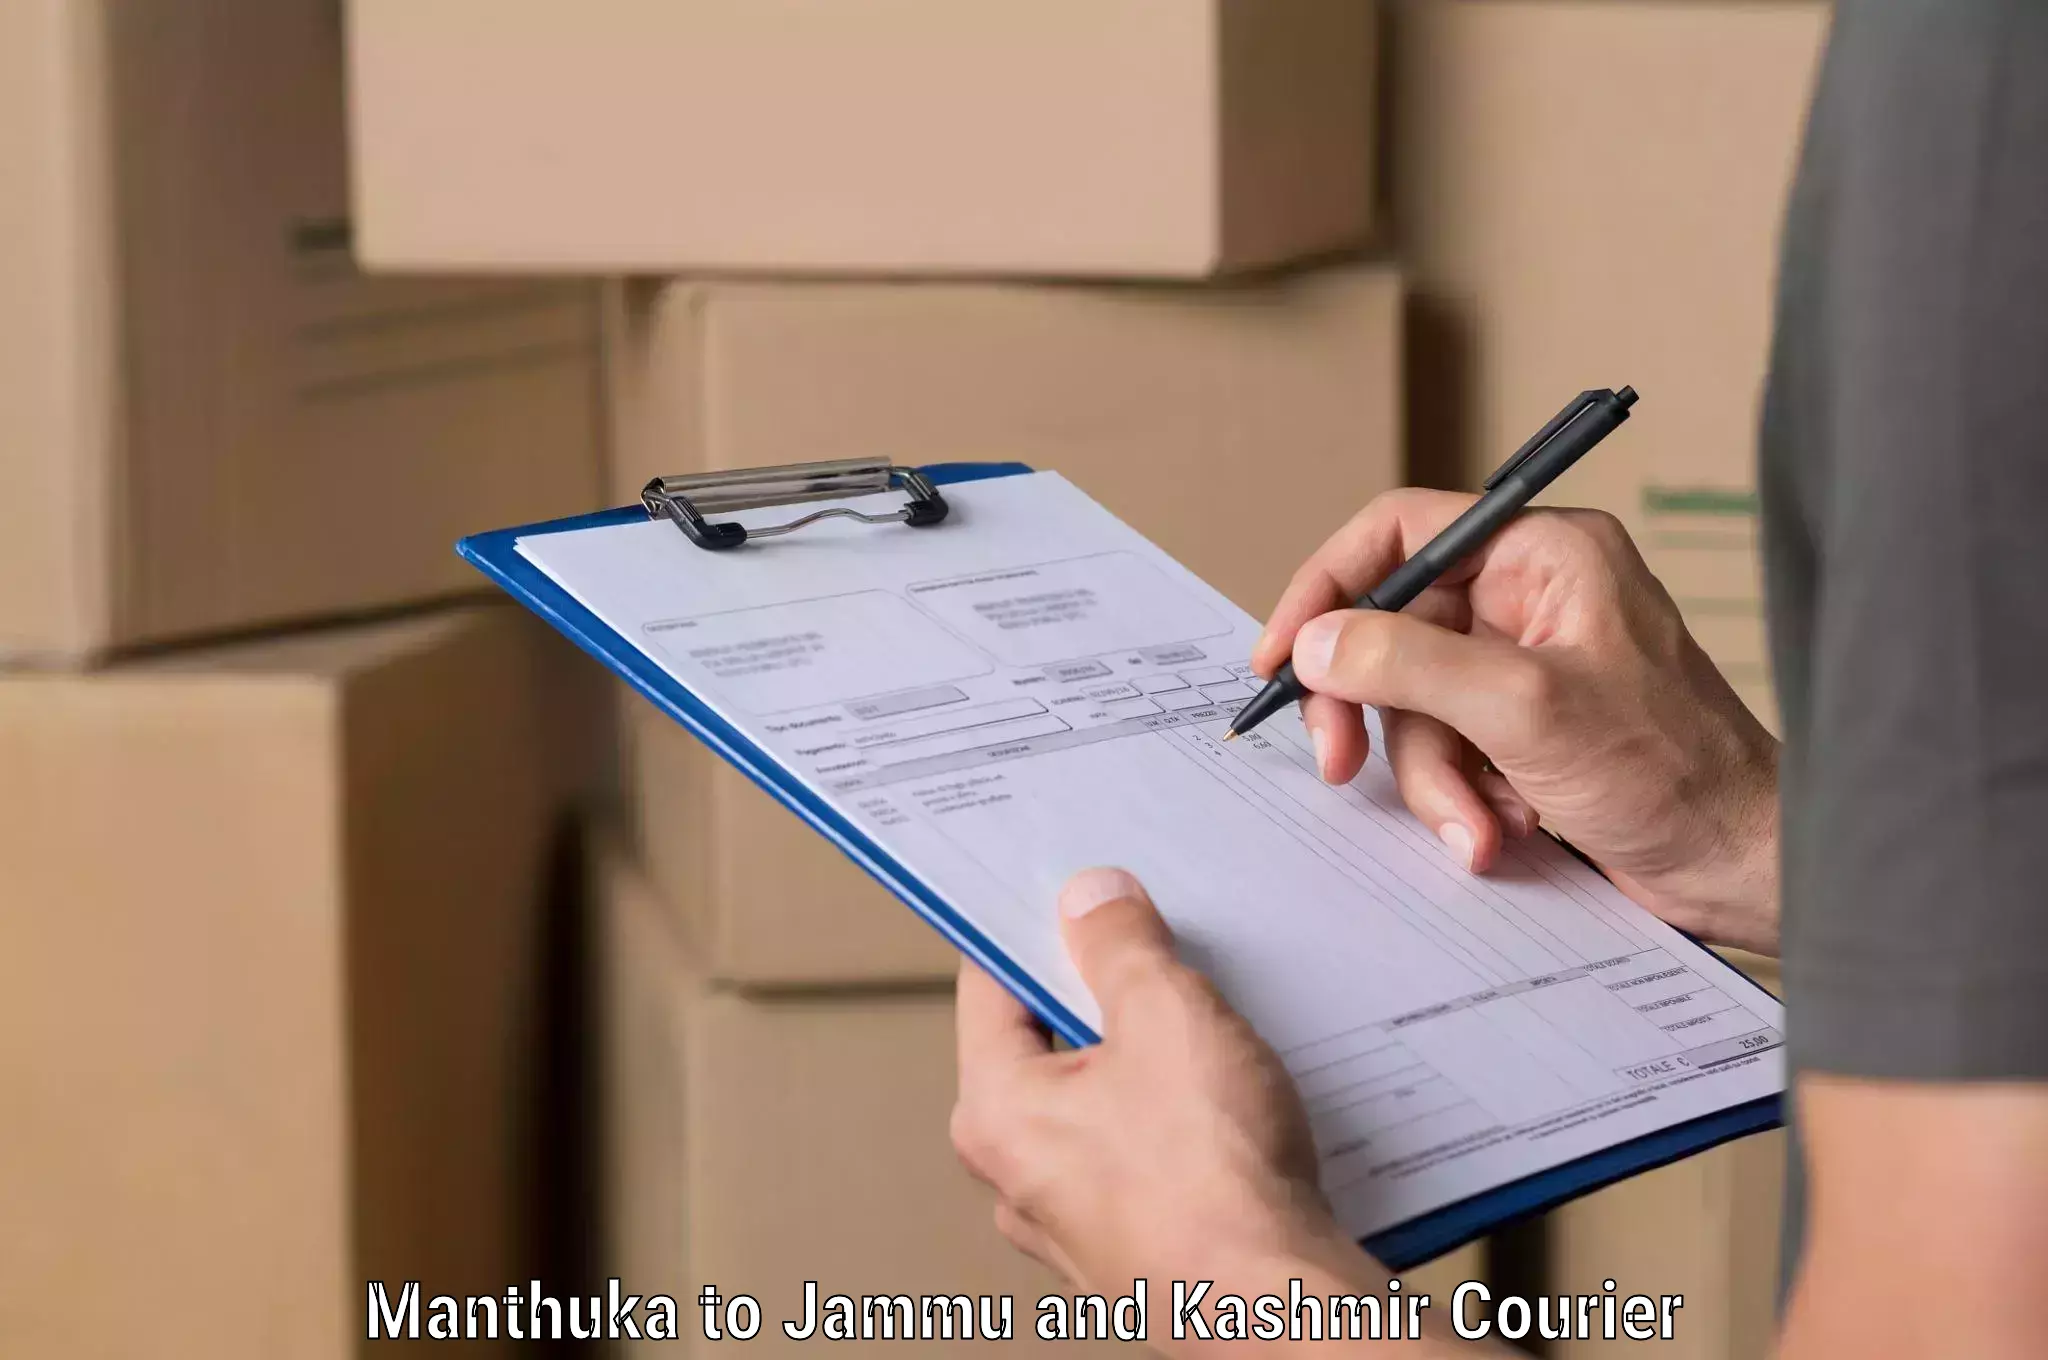 State-of-the-art courier technology Manthuka to Jammu and Kashmir